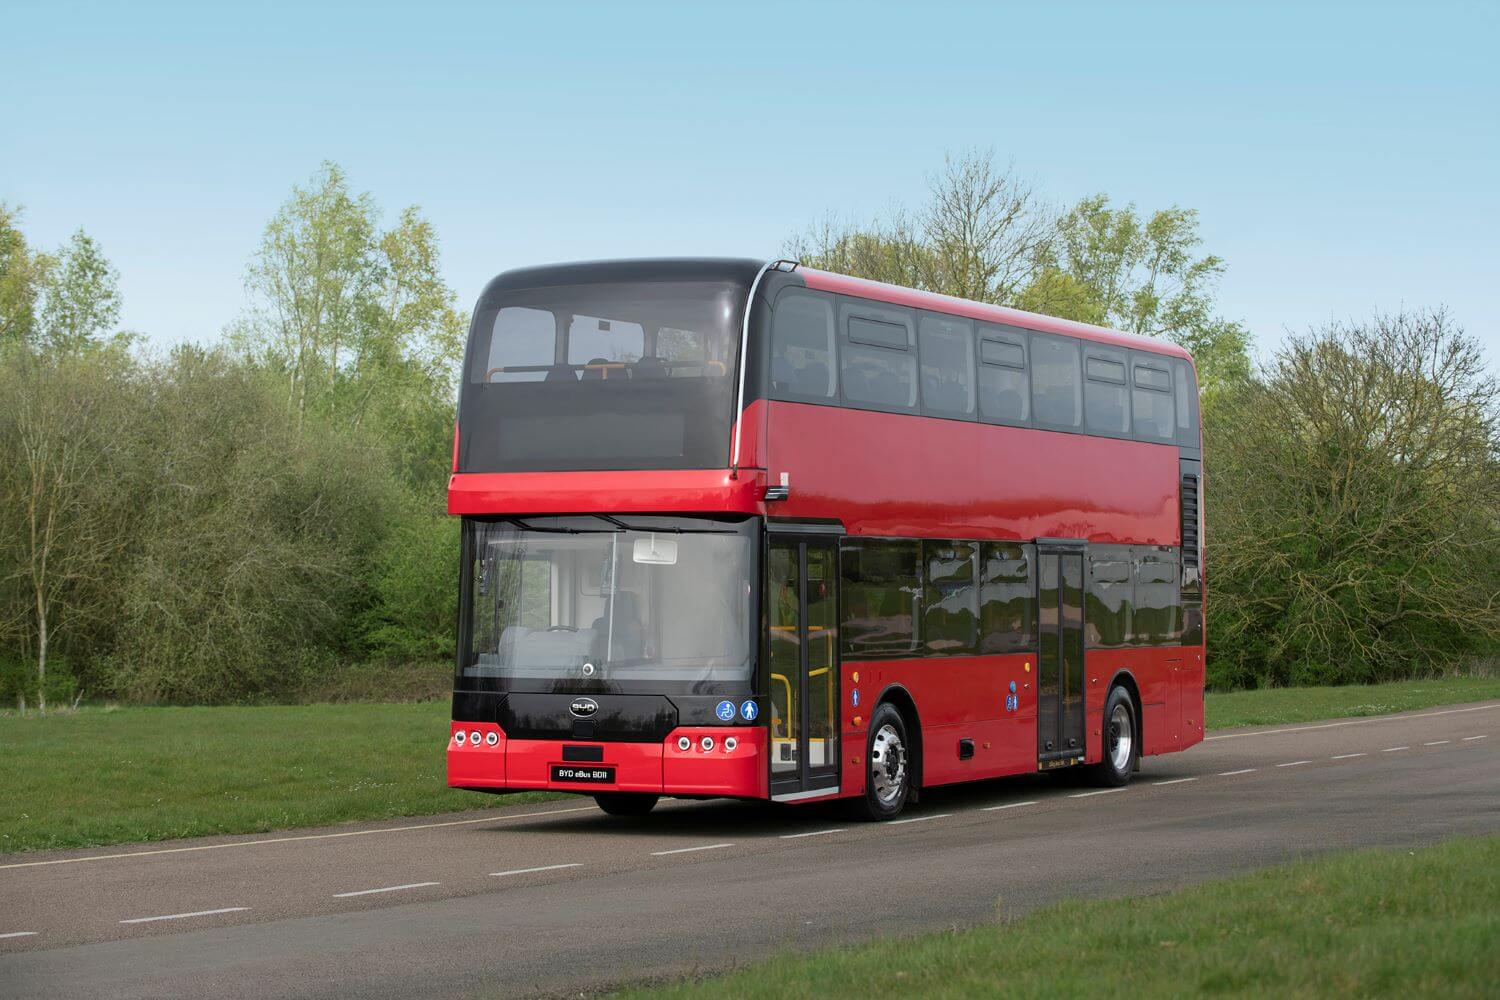 The BD11 marks a key moment in the Chinese company’s involvement in the UK bus market